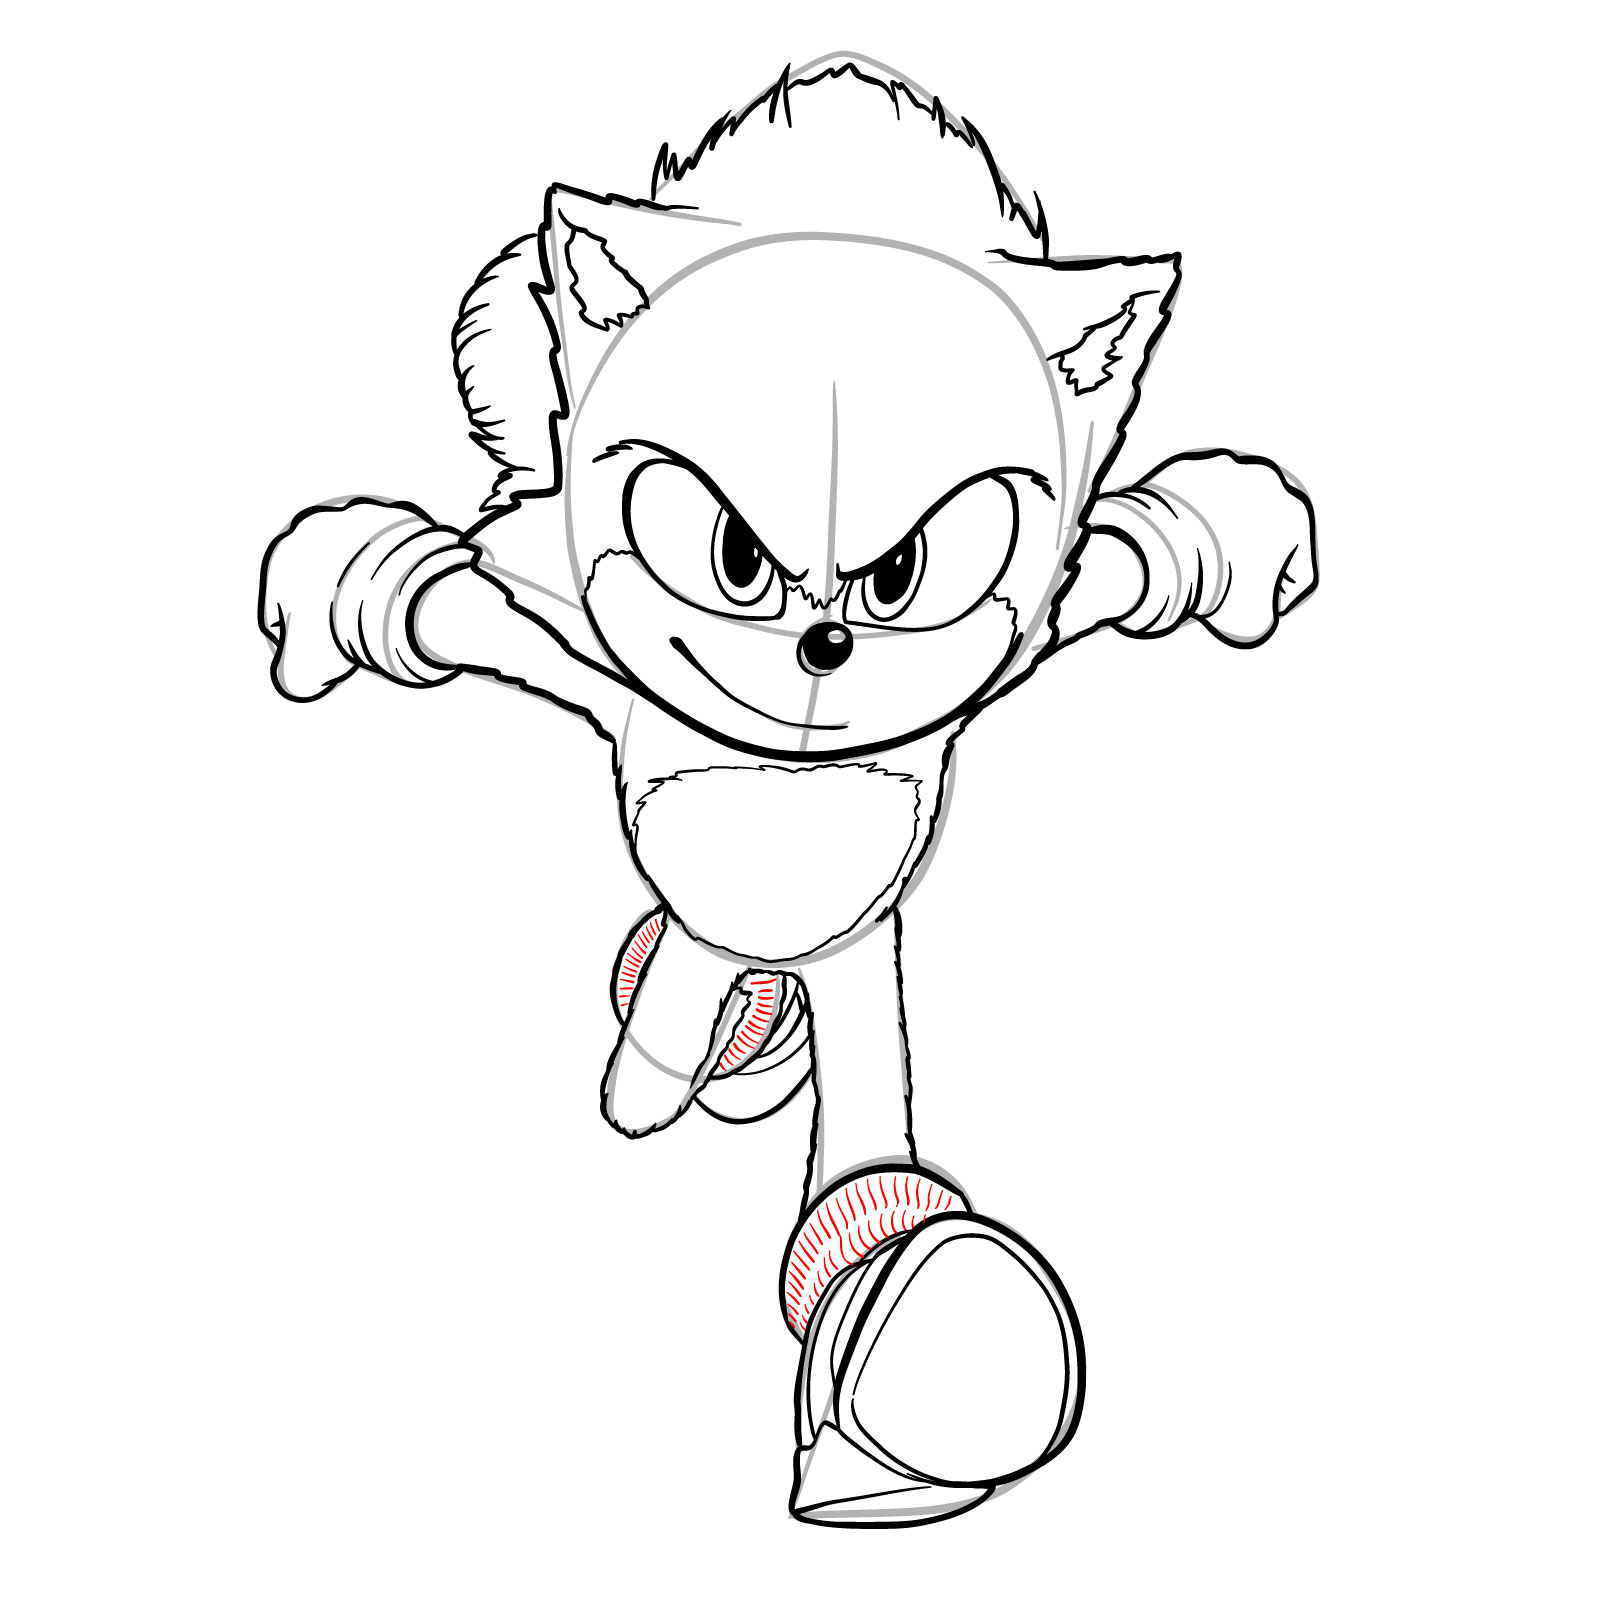 How to draw Sonic from the movie - step 30